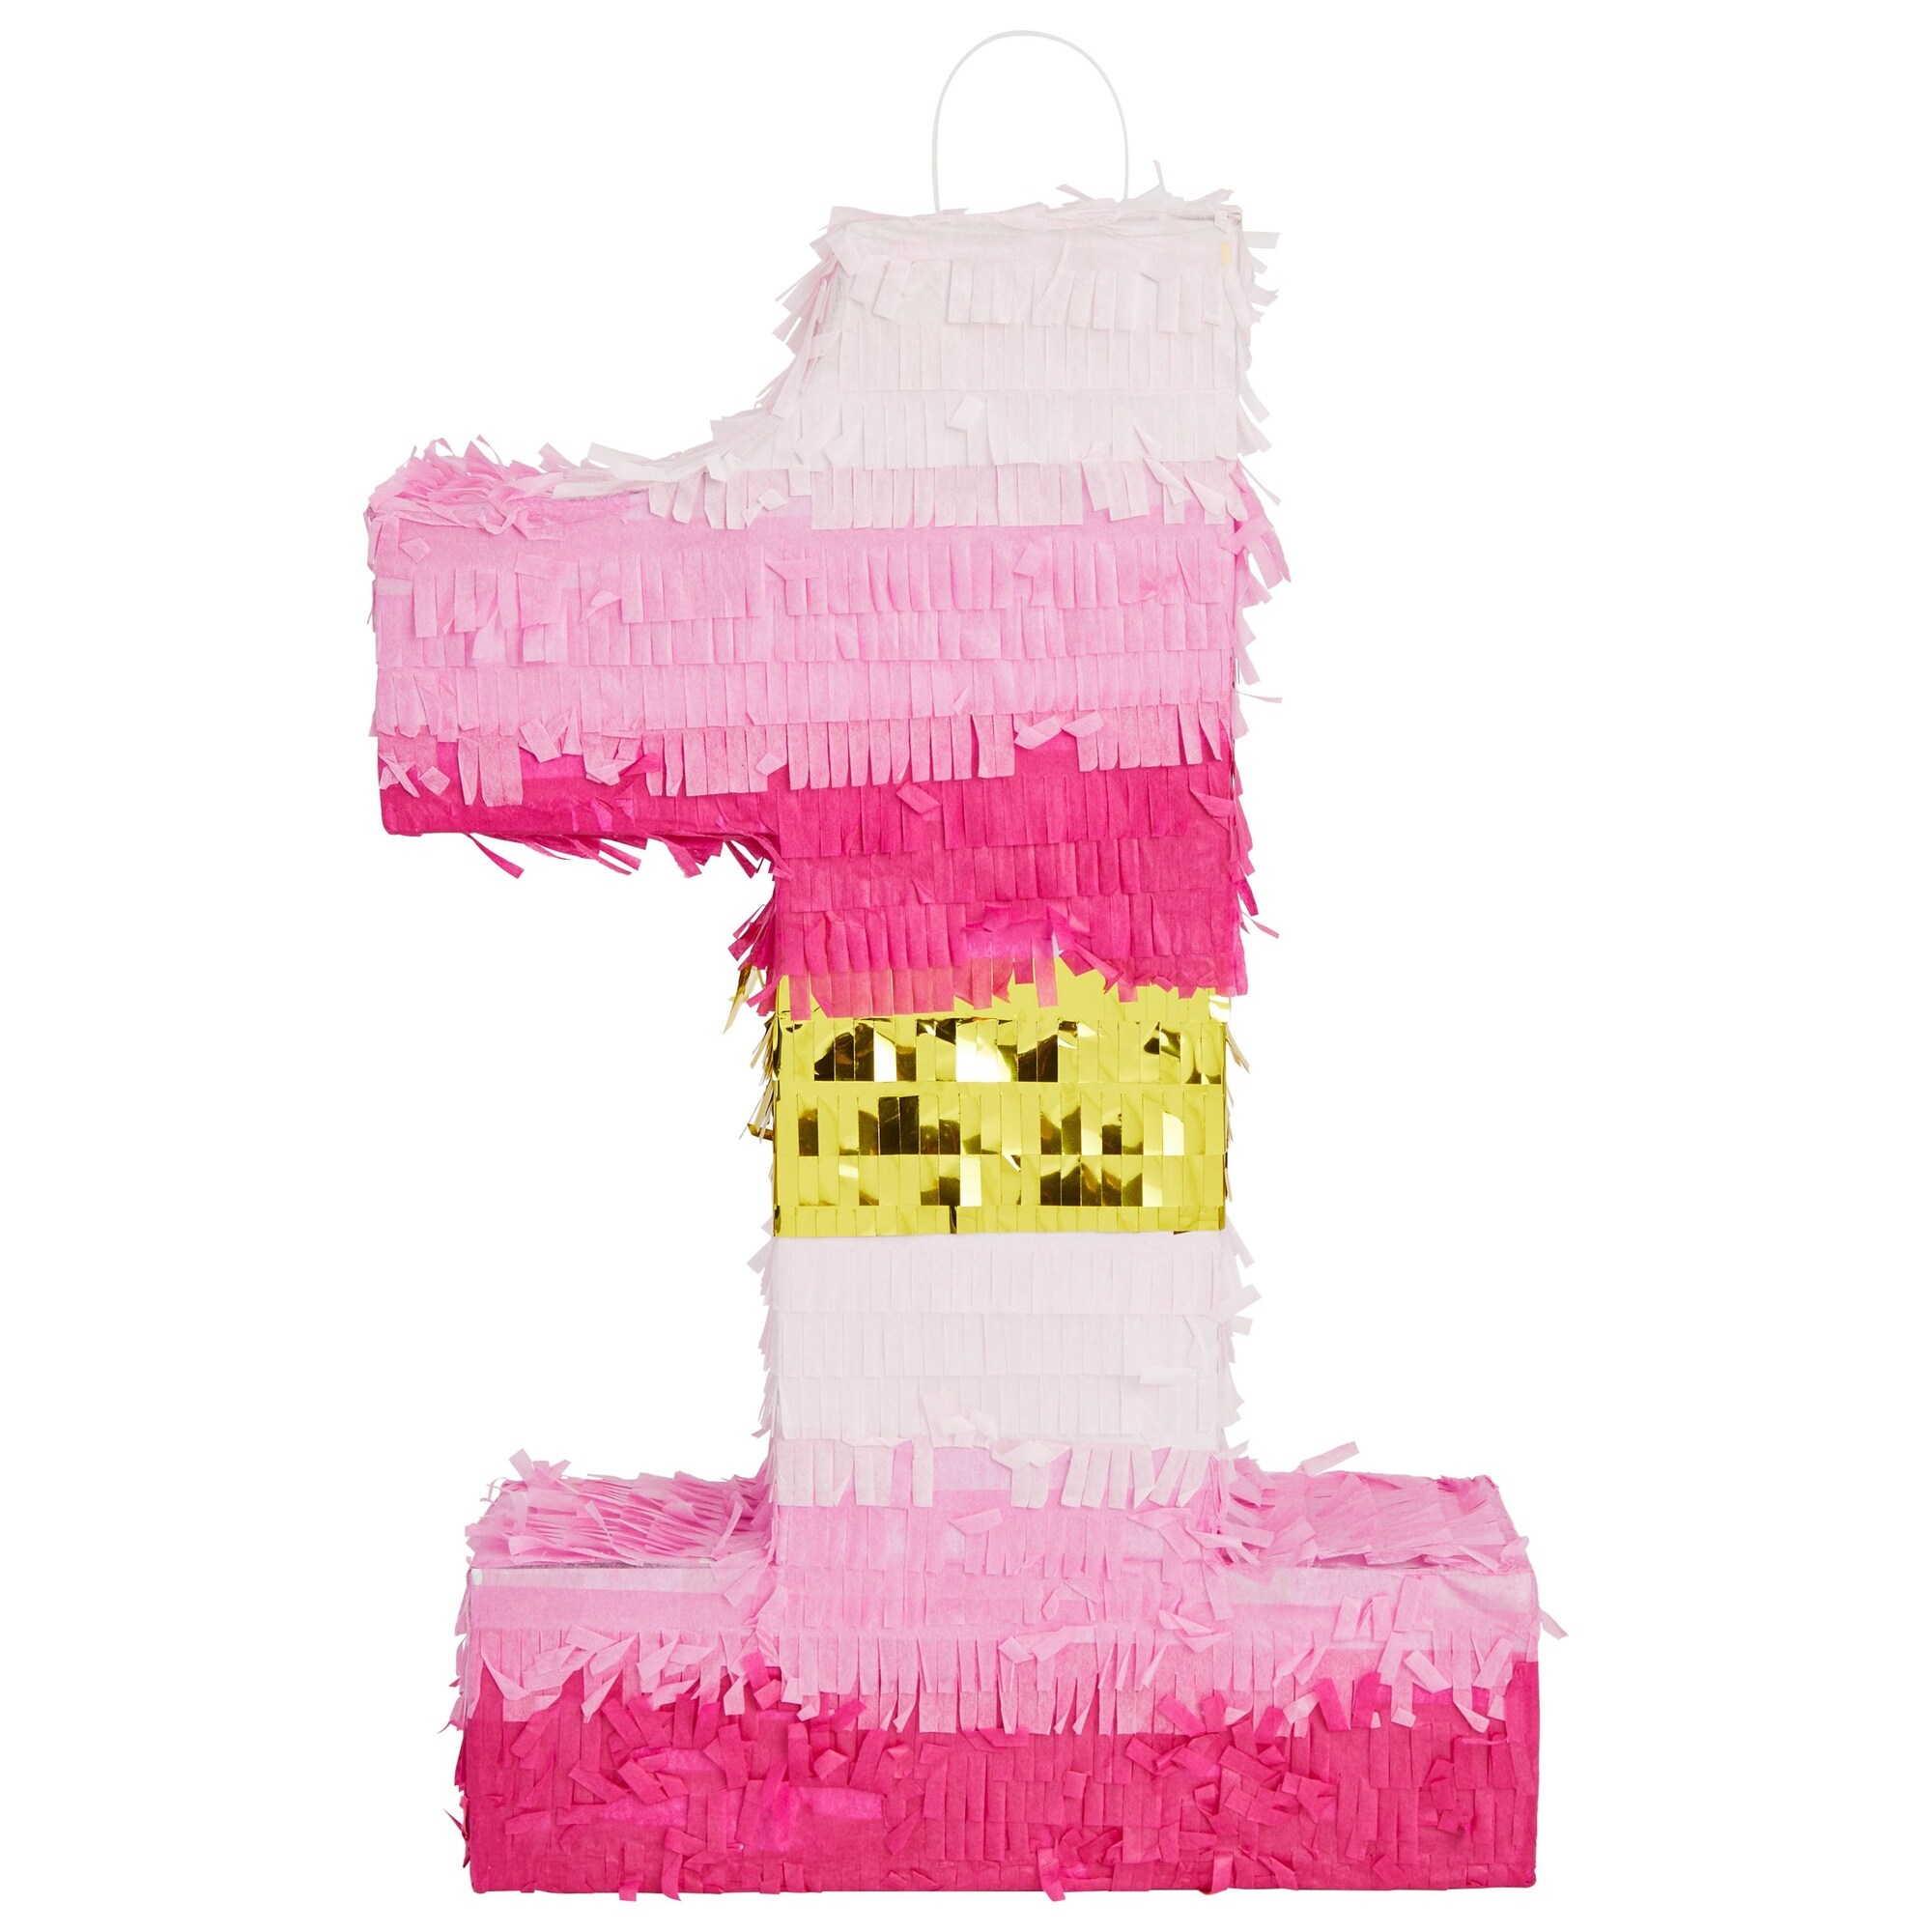 Pinata Number 1, Floral 1st Birthday Party Supplies (16.5 x 11 x 3 In) -  Bed Bath & Beyond - 33034869